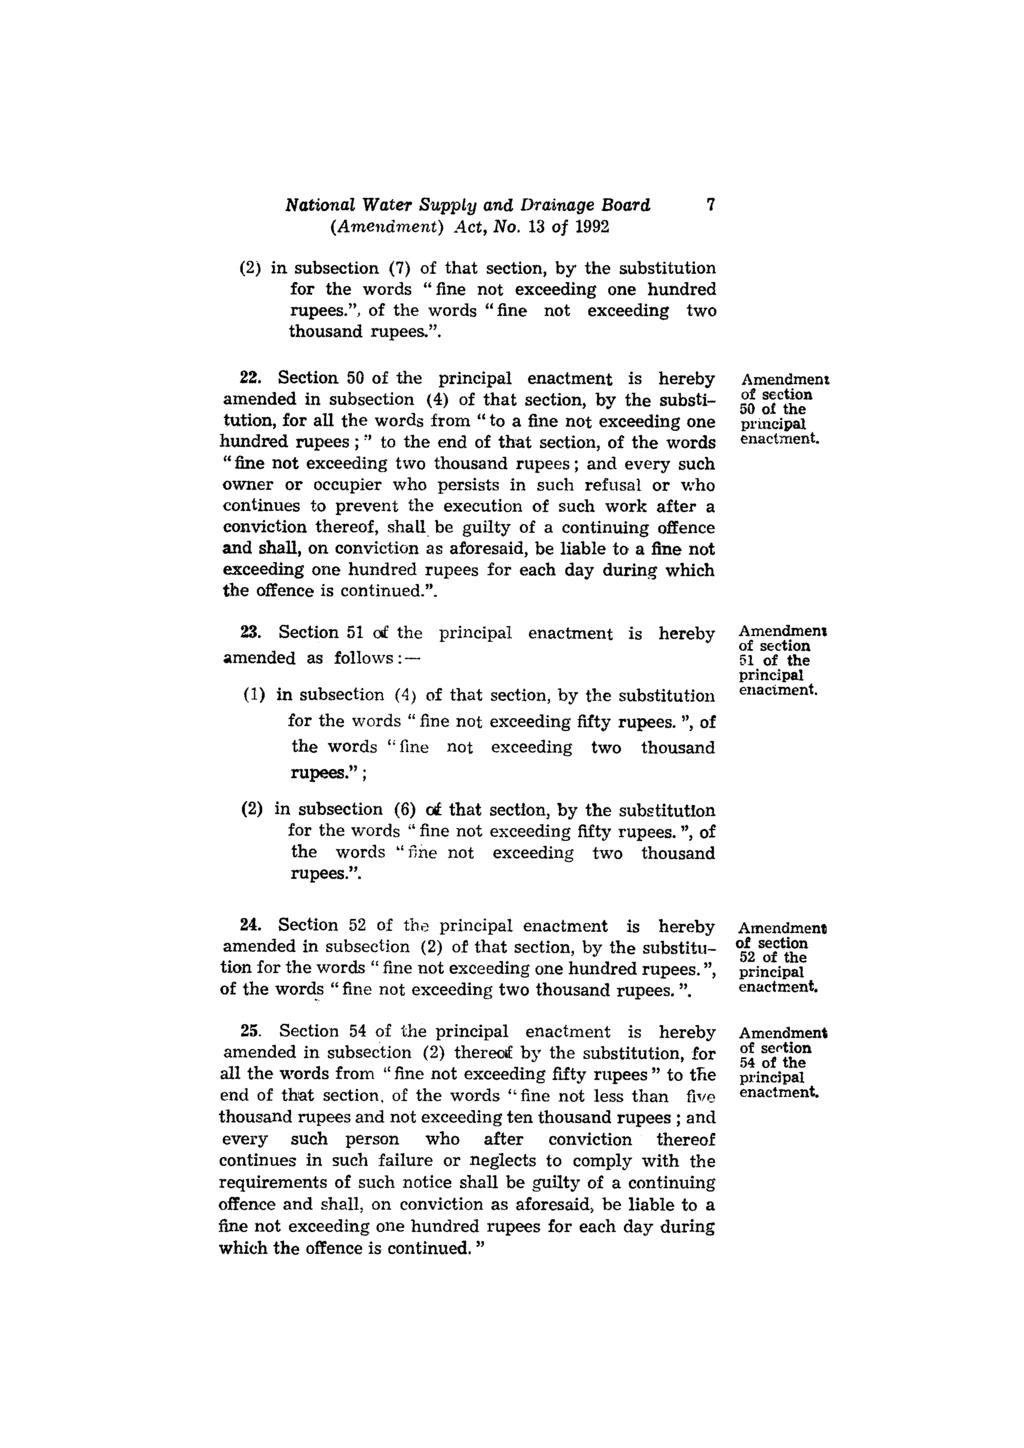 National Watw Supply and Drainage Board 7 (2) in subsection (7) of that section, by the substitution for the words "fine not exceeding one hundred rupees.